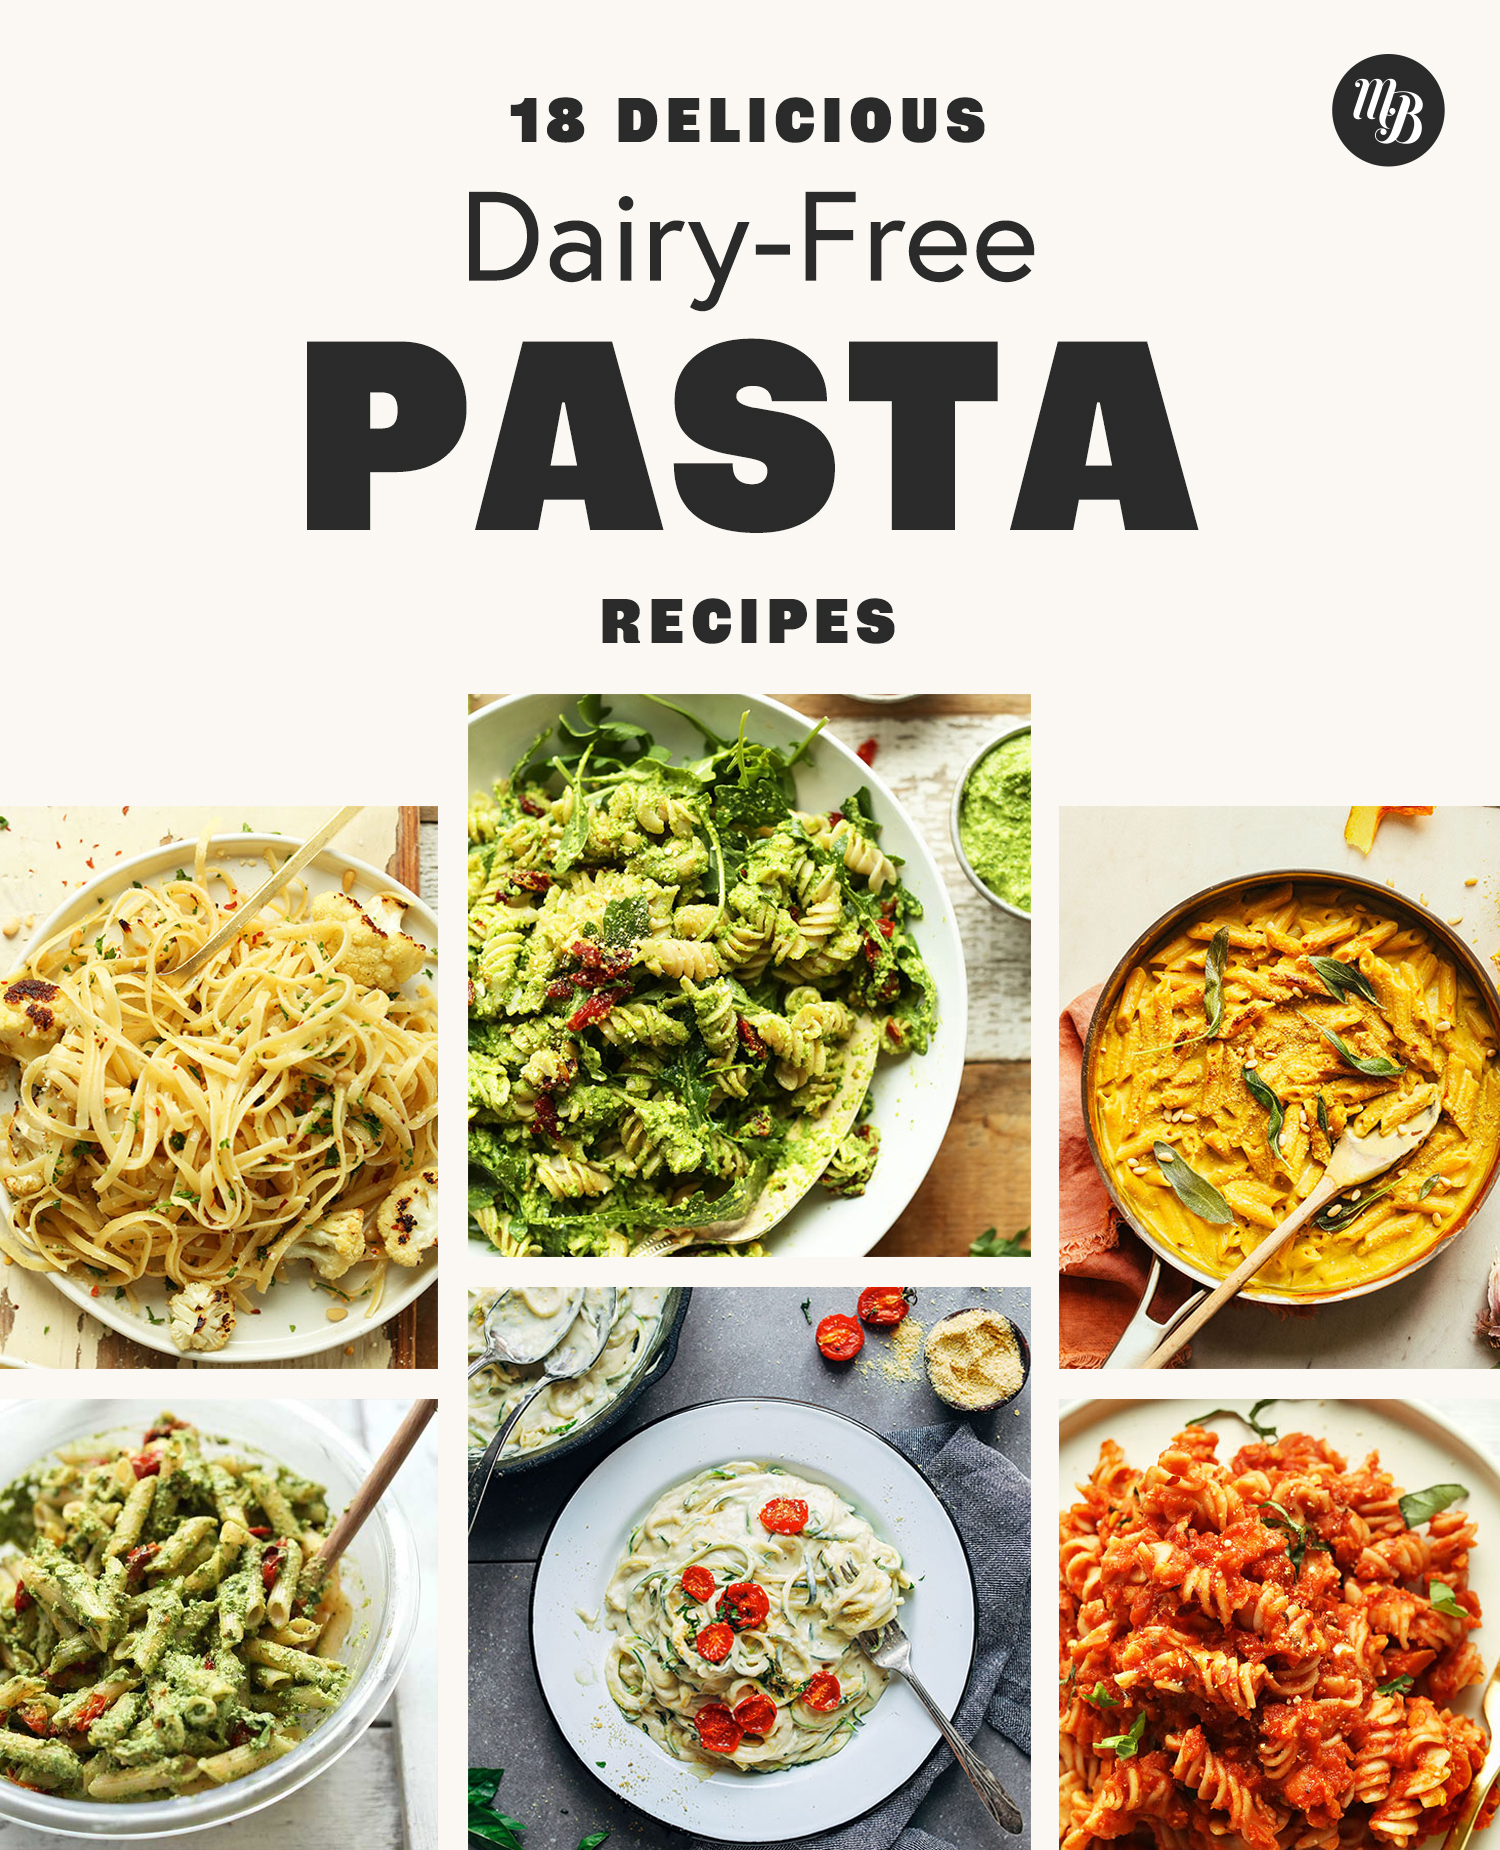 Assortment of dairy-free pasta dishes